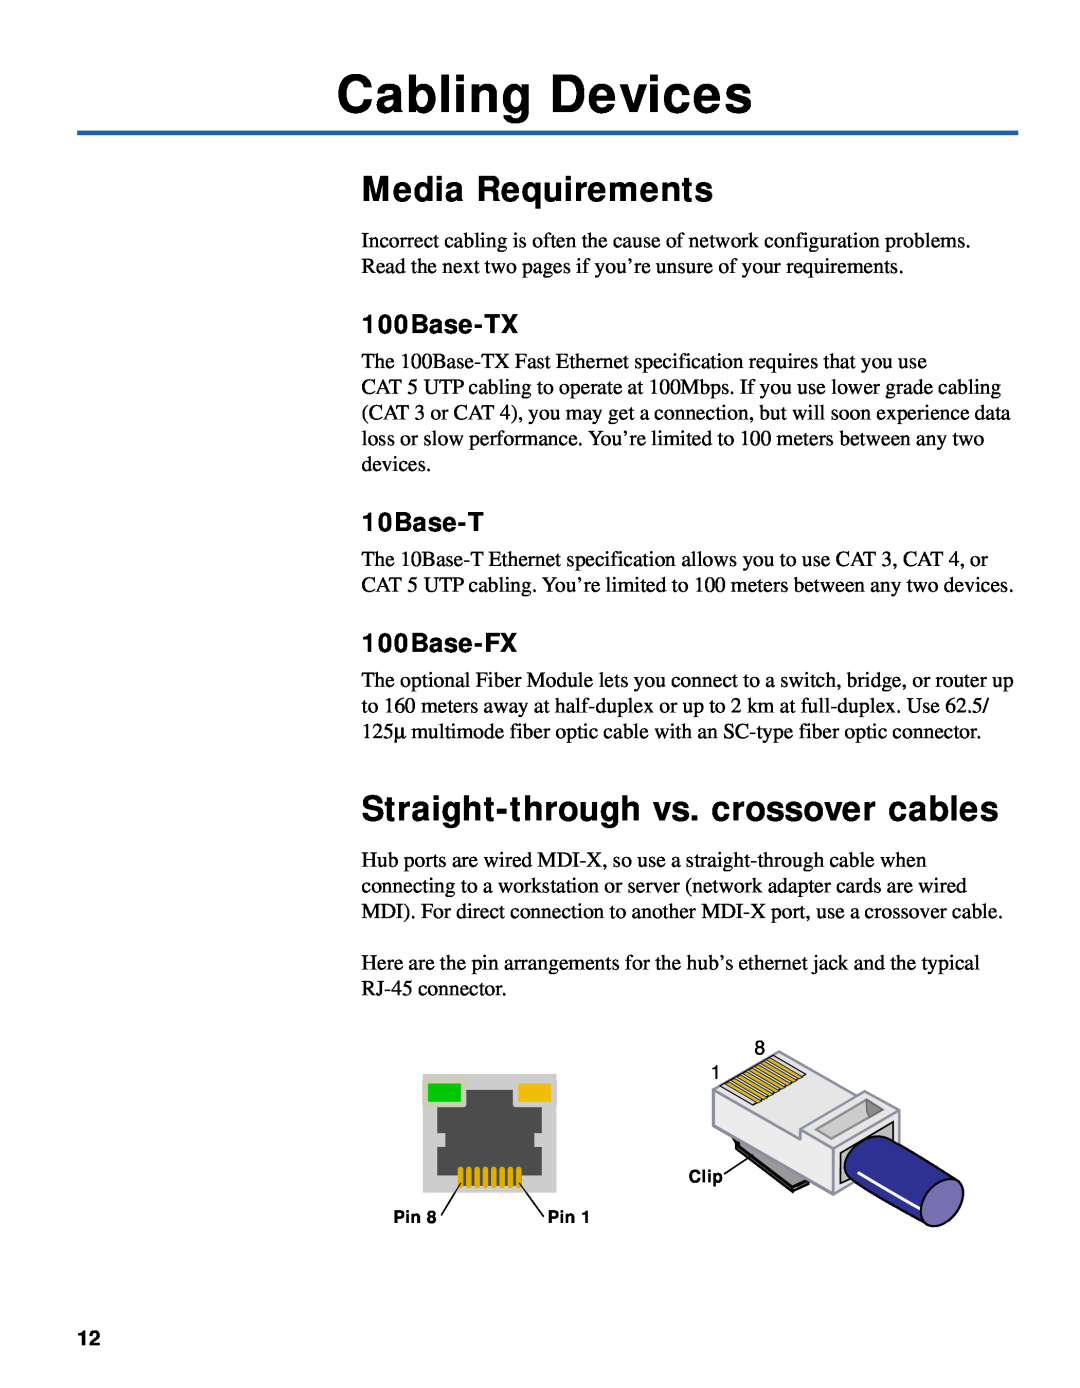 Intel 220T Cabling Devices, Media Requirements, Straight-through vs. crossover cables, 100Base-TX, 10Base-T, 100Base-FX 